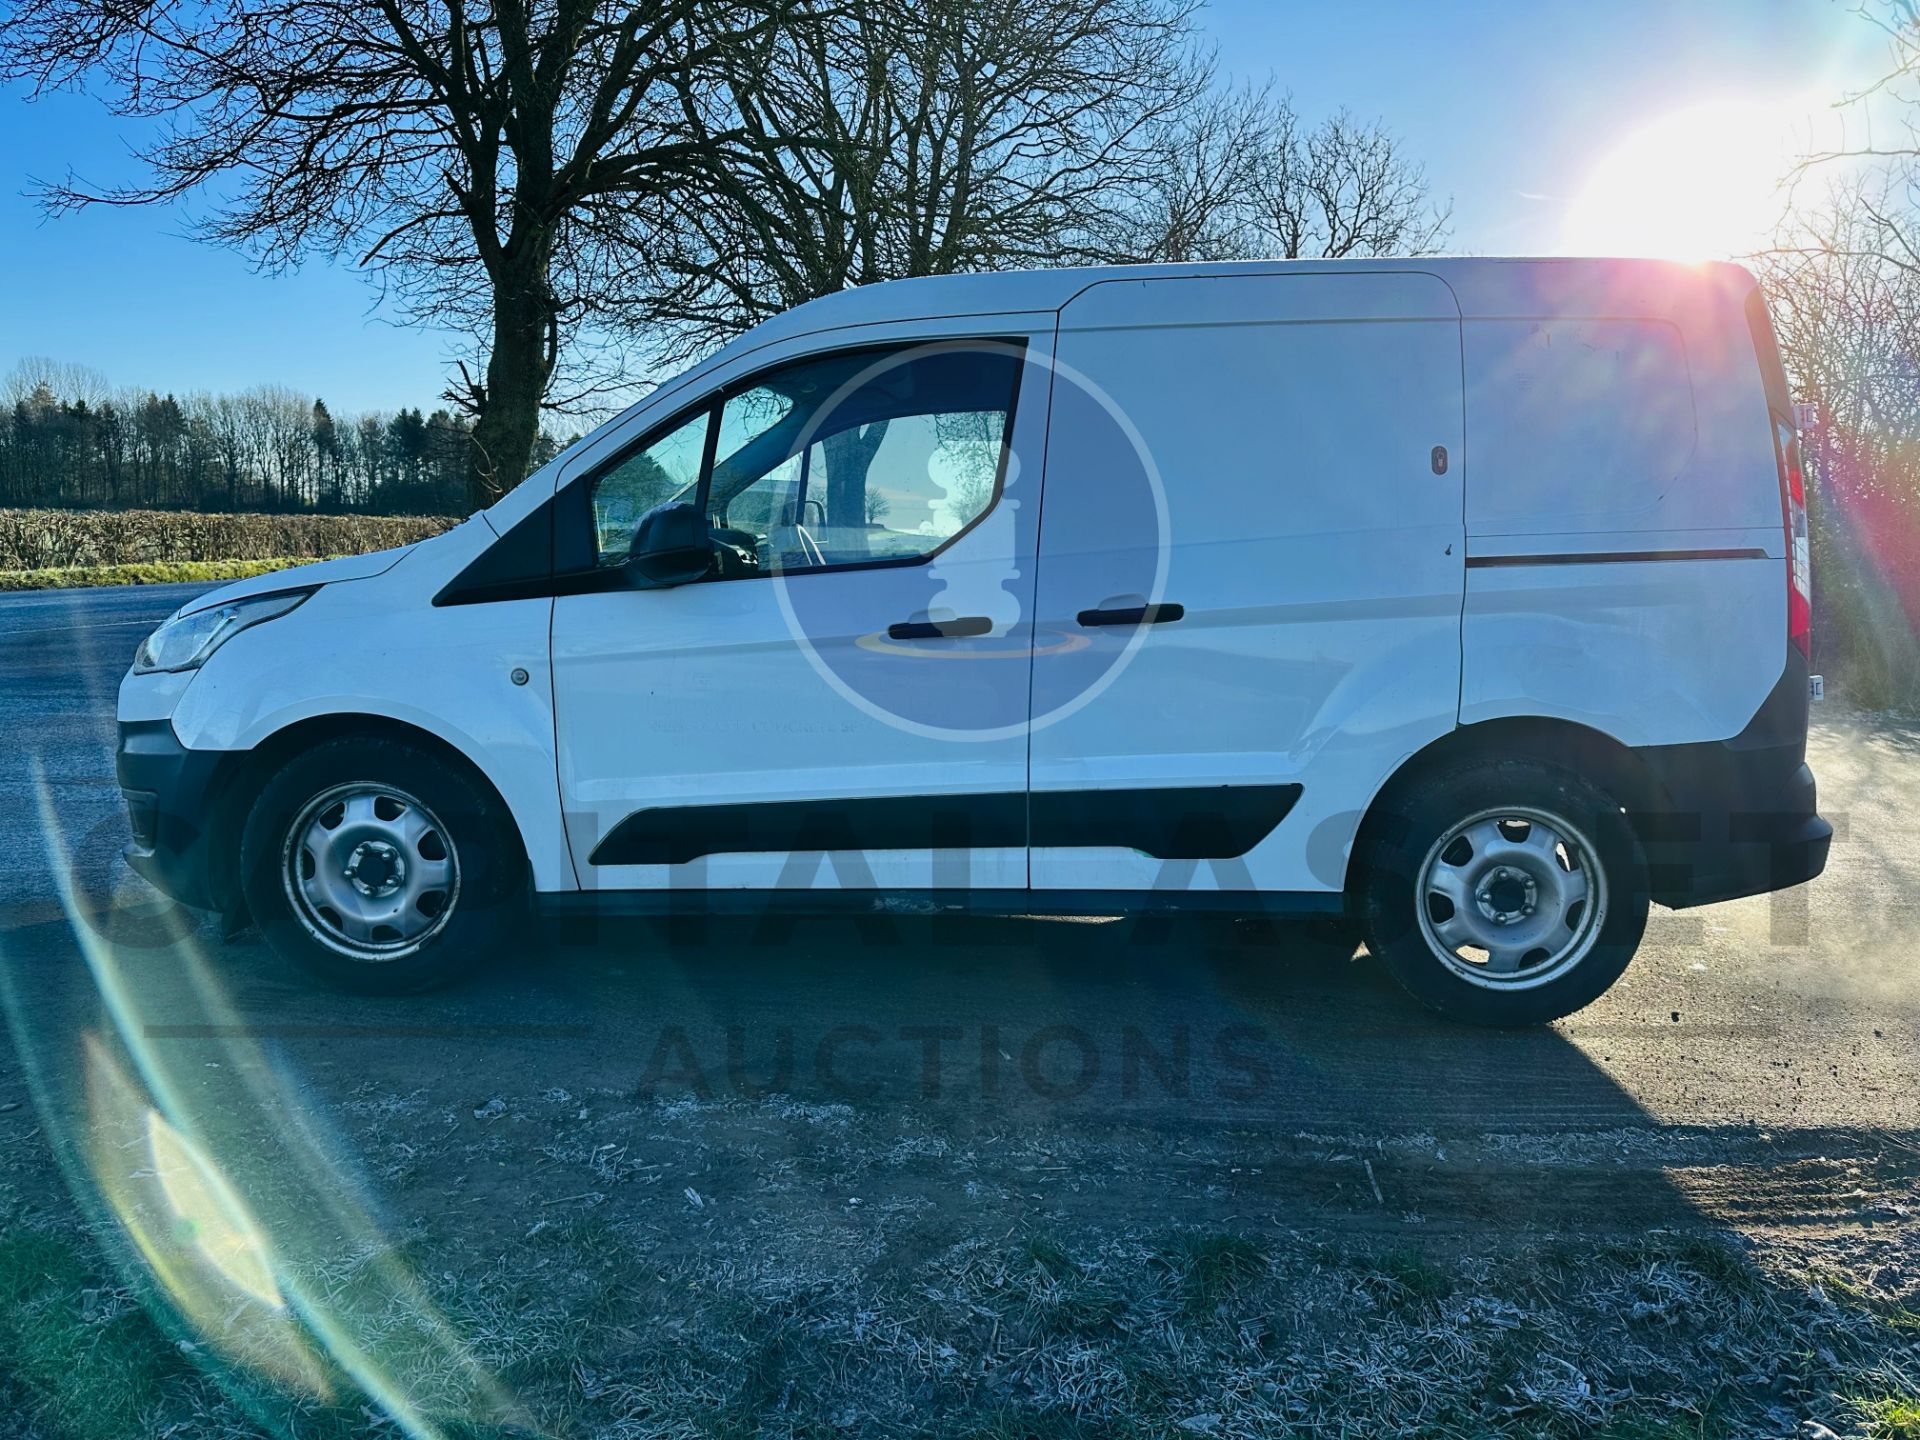 FORD TRANSIT CONNECT 1.5TDCI - 5 SEATER CREW VAN - 2019 MODEL - 1 OWNER FROM NEW - ULEZ COMPLIANT! - Image 6 of 32